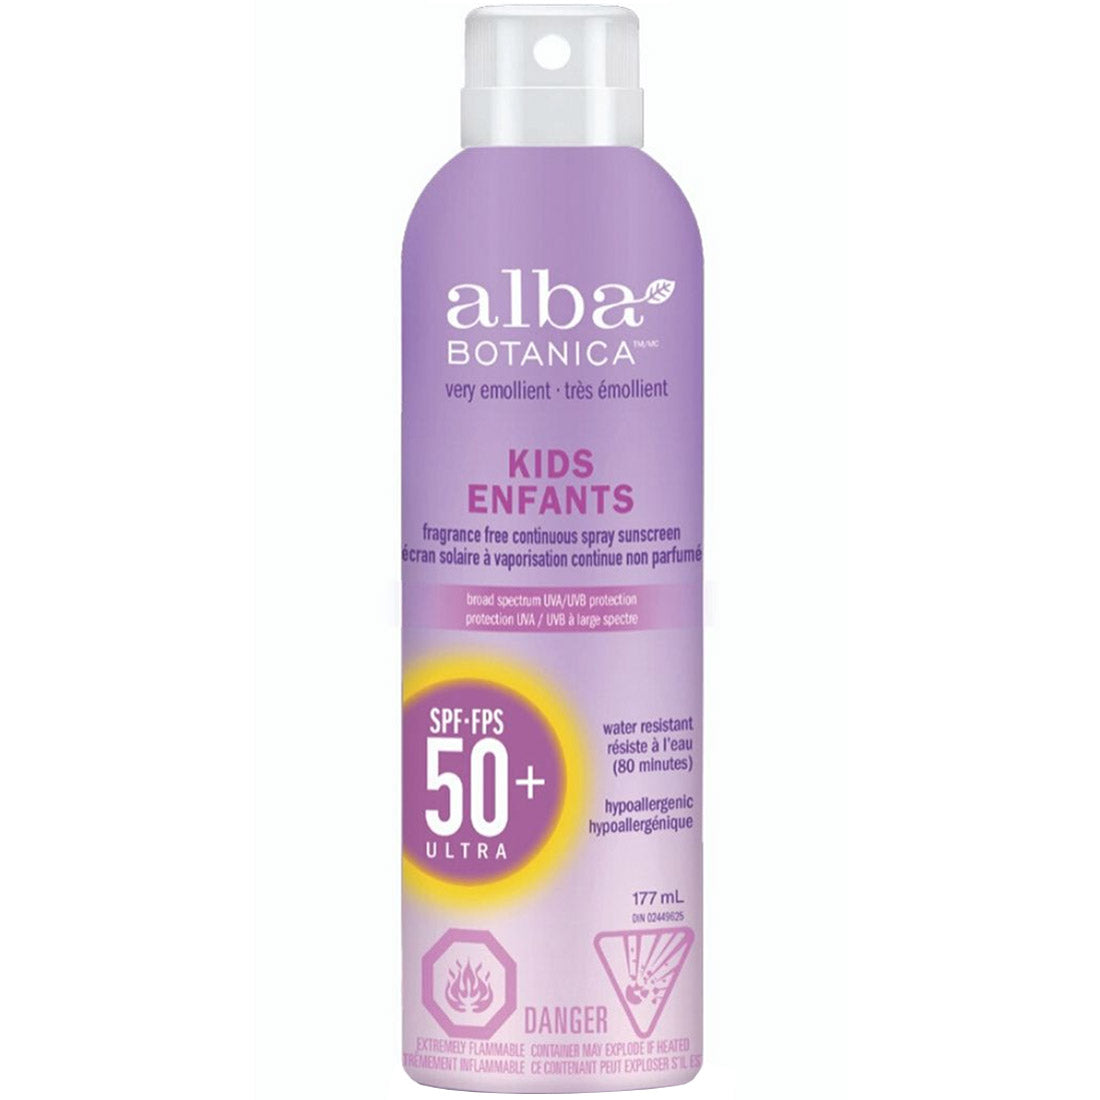 Alba Botanica Kids Fragrance Free Sunscreen Continuous Spray, Water Resistant (SPF 50), 177ml